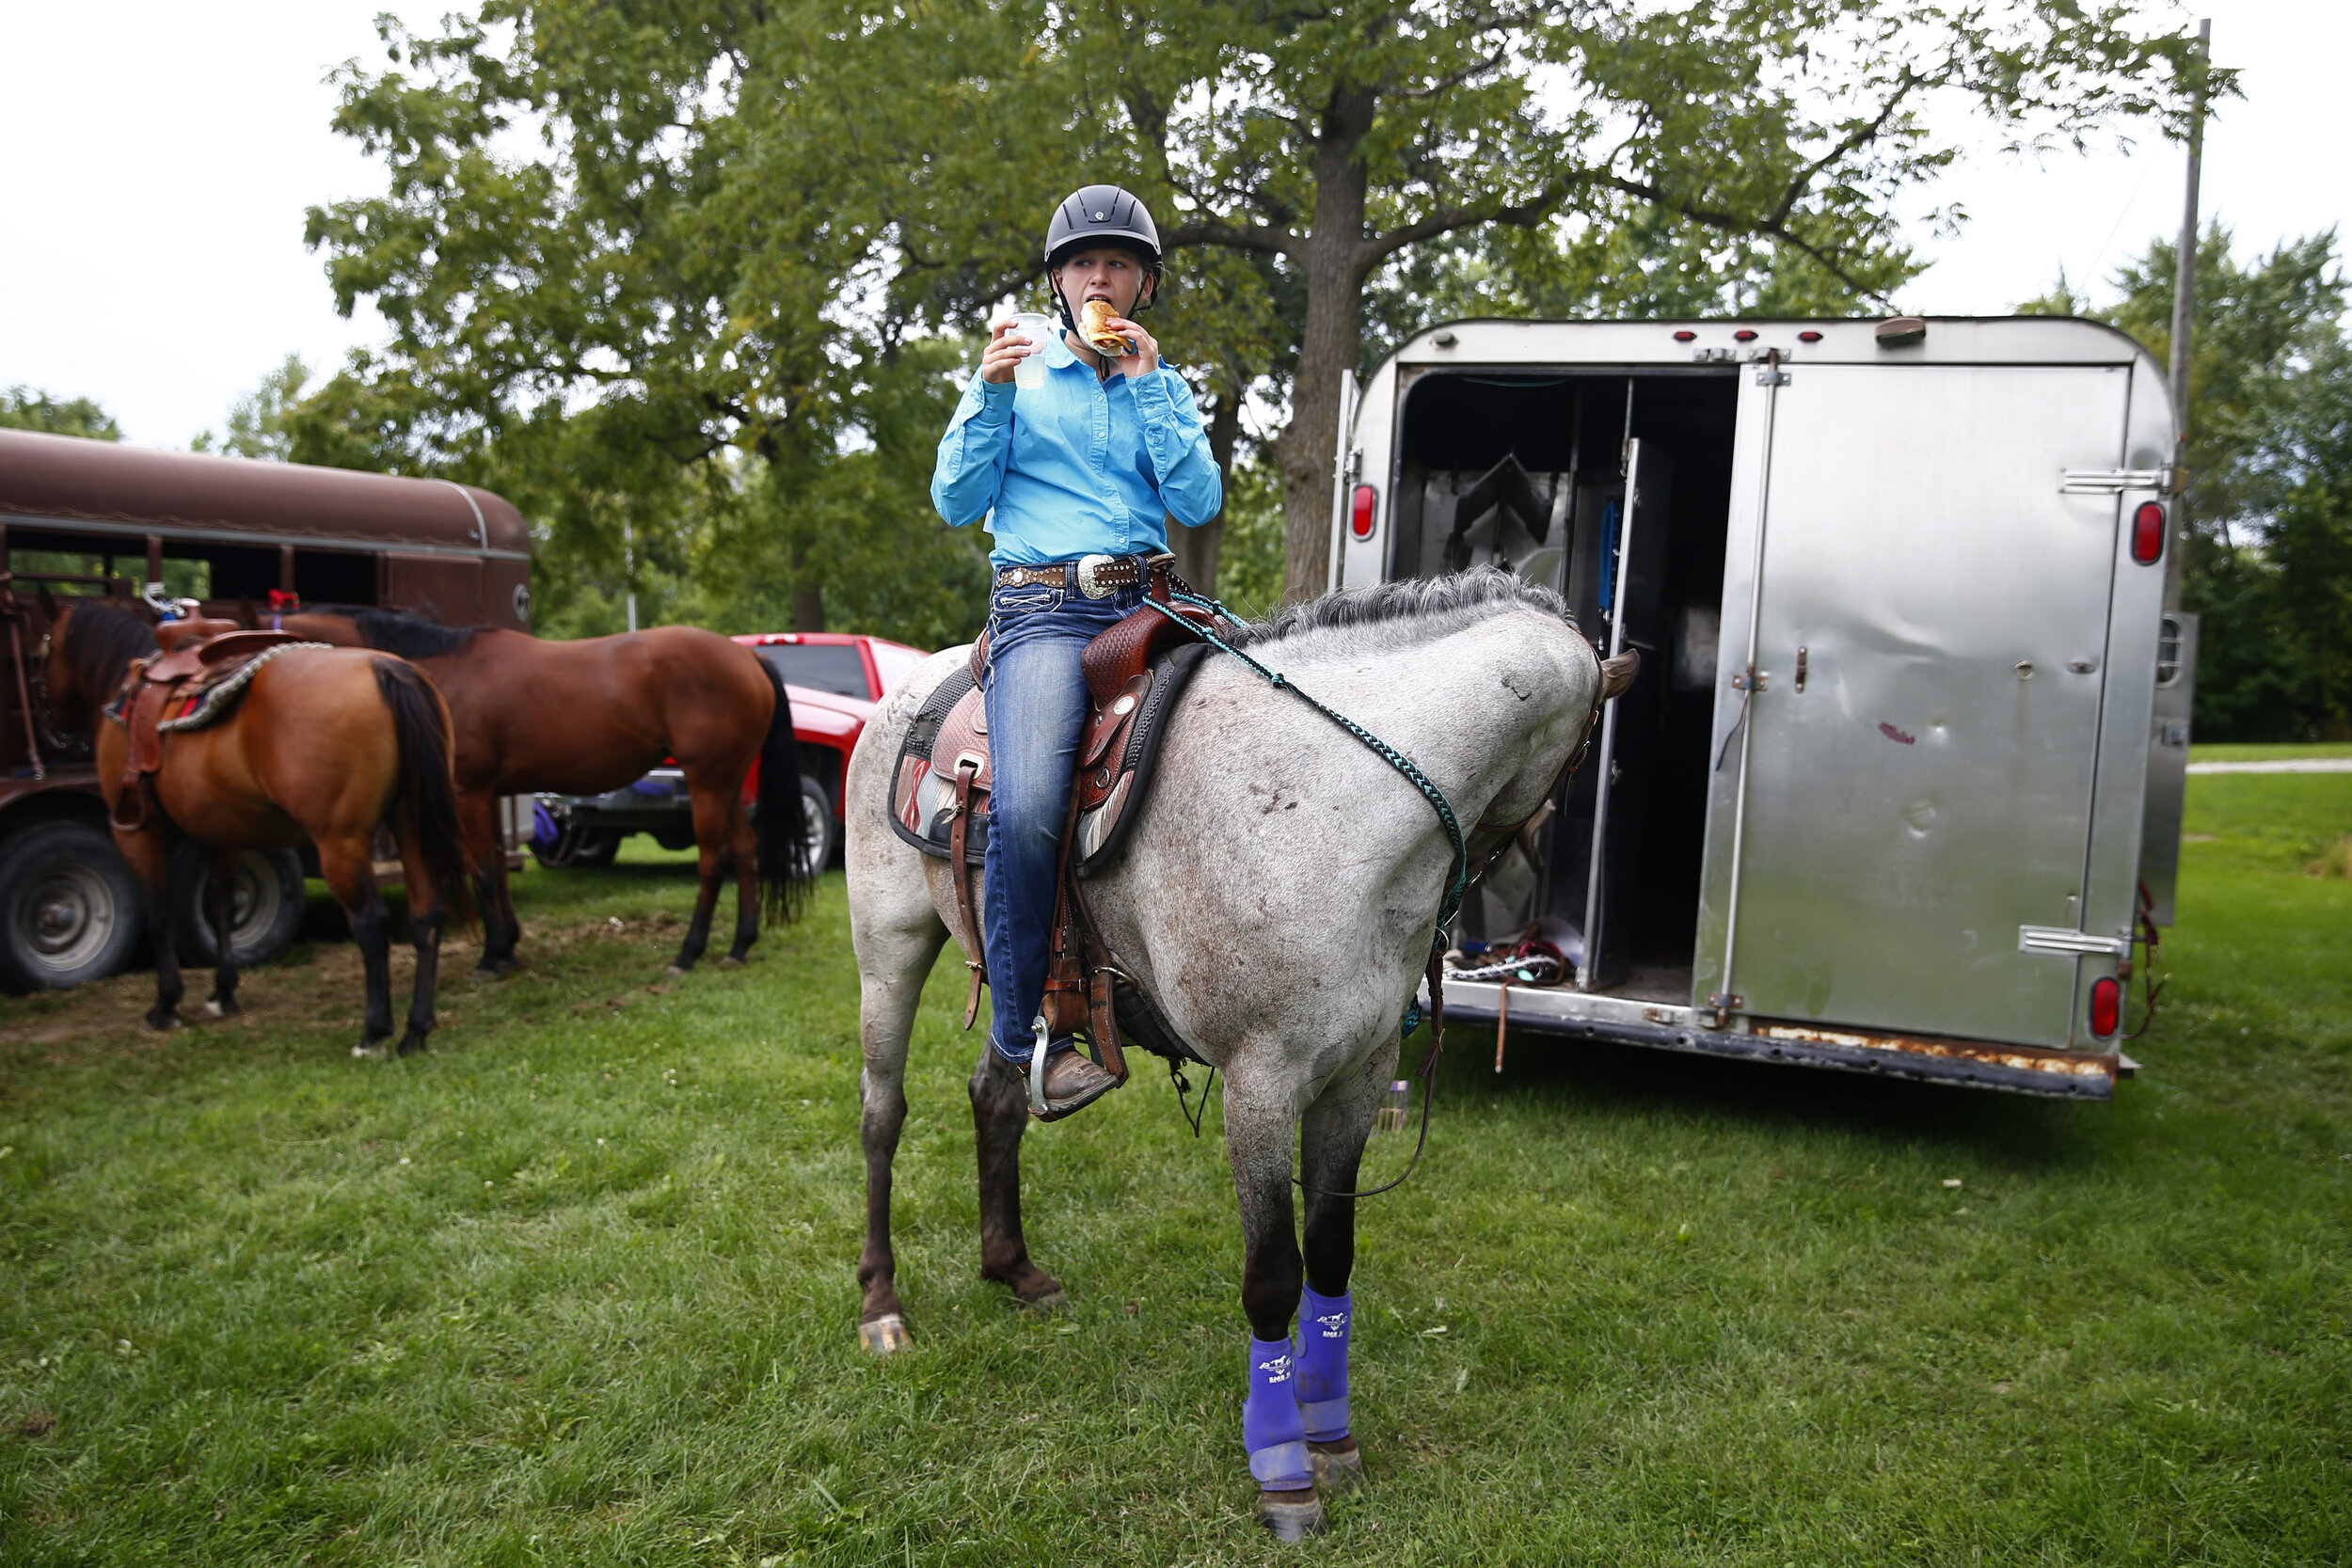   A 4H horse show in West Liberty, IA. 2019. The town is in Muscatine County, Iowa, and as of the 2010 U.S. Census was the only city in the state to have a majority Hispanic population.  